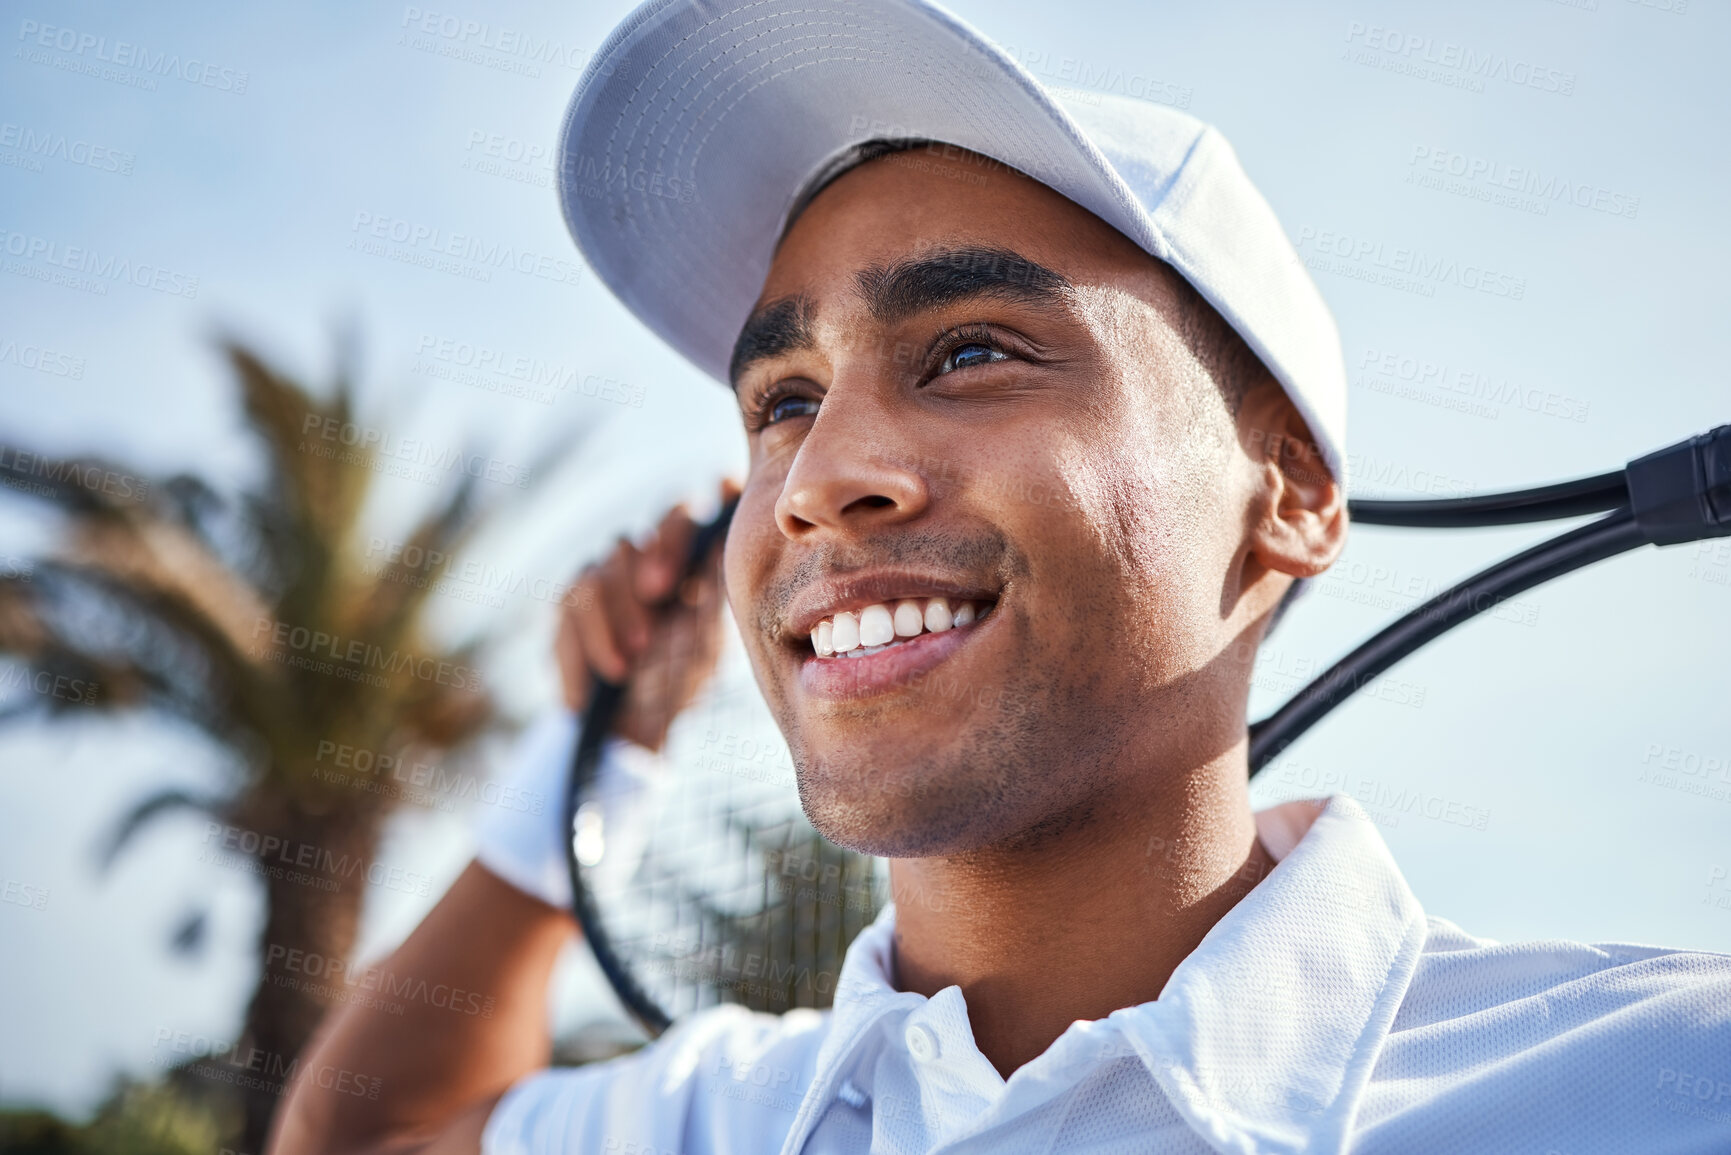 Buy stock photo Shot of a handsome young man standing and holding a tennis racket during practice